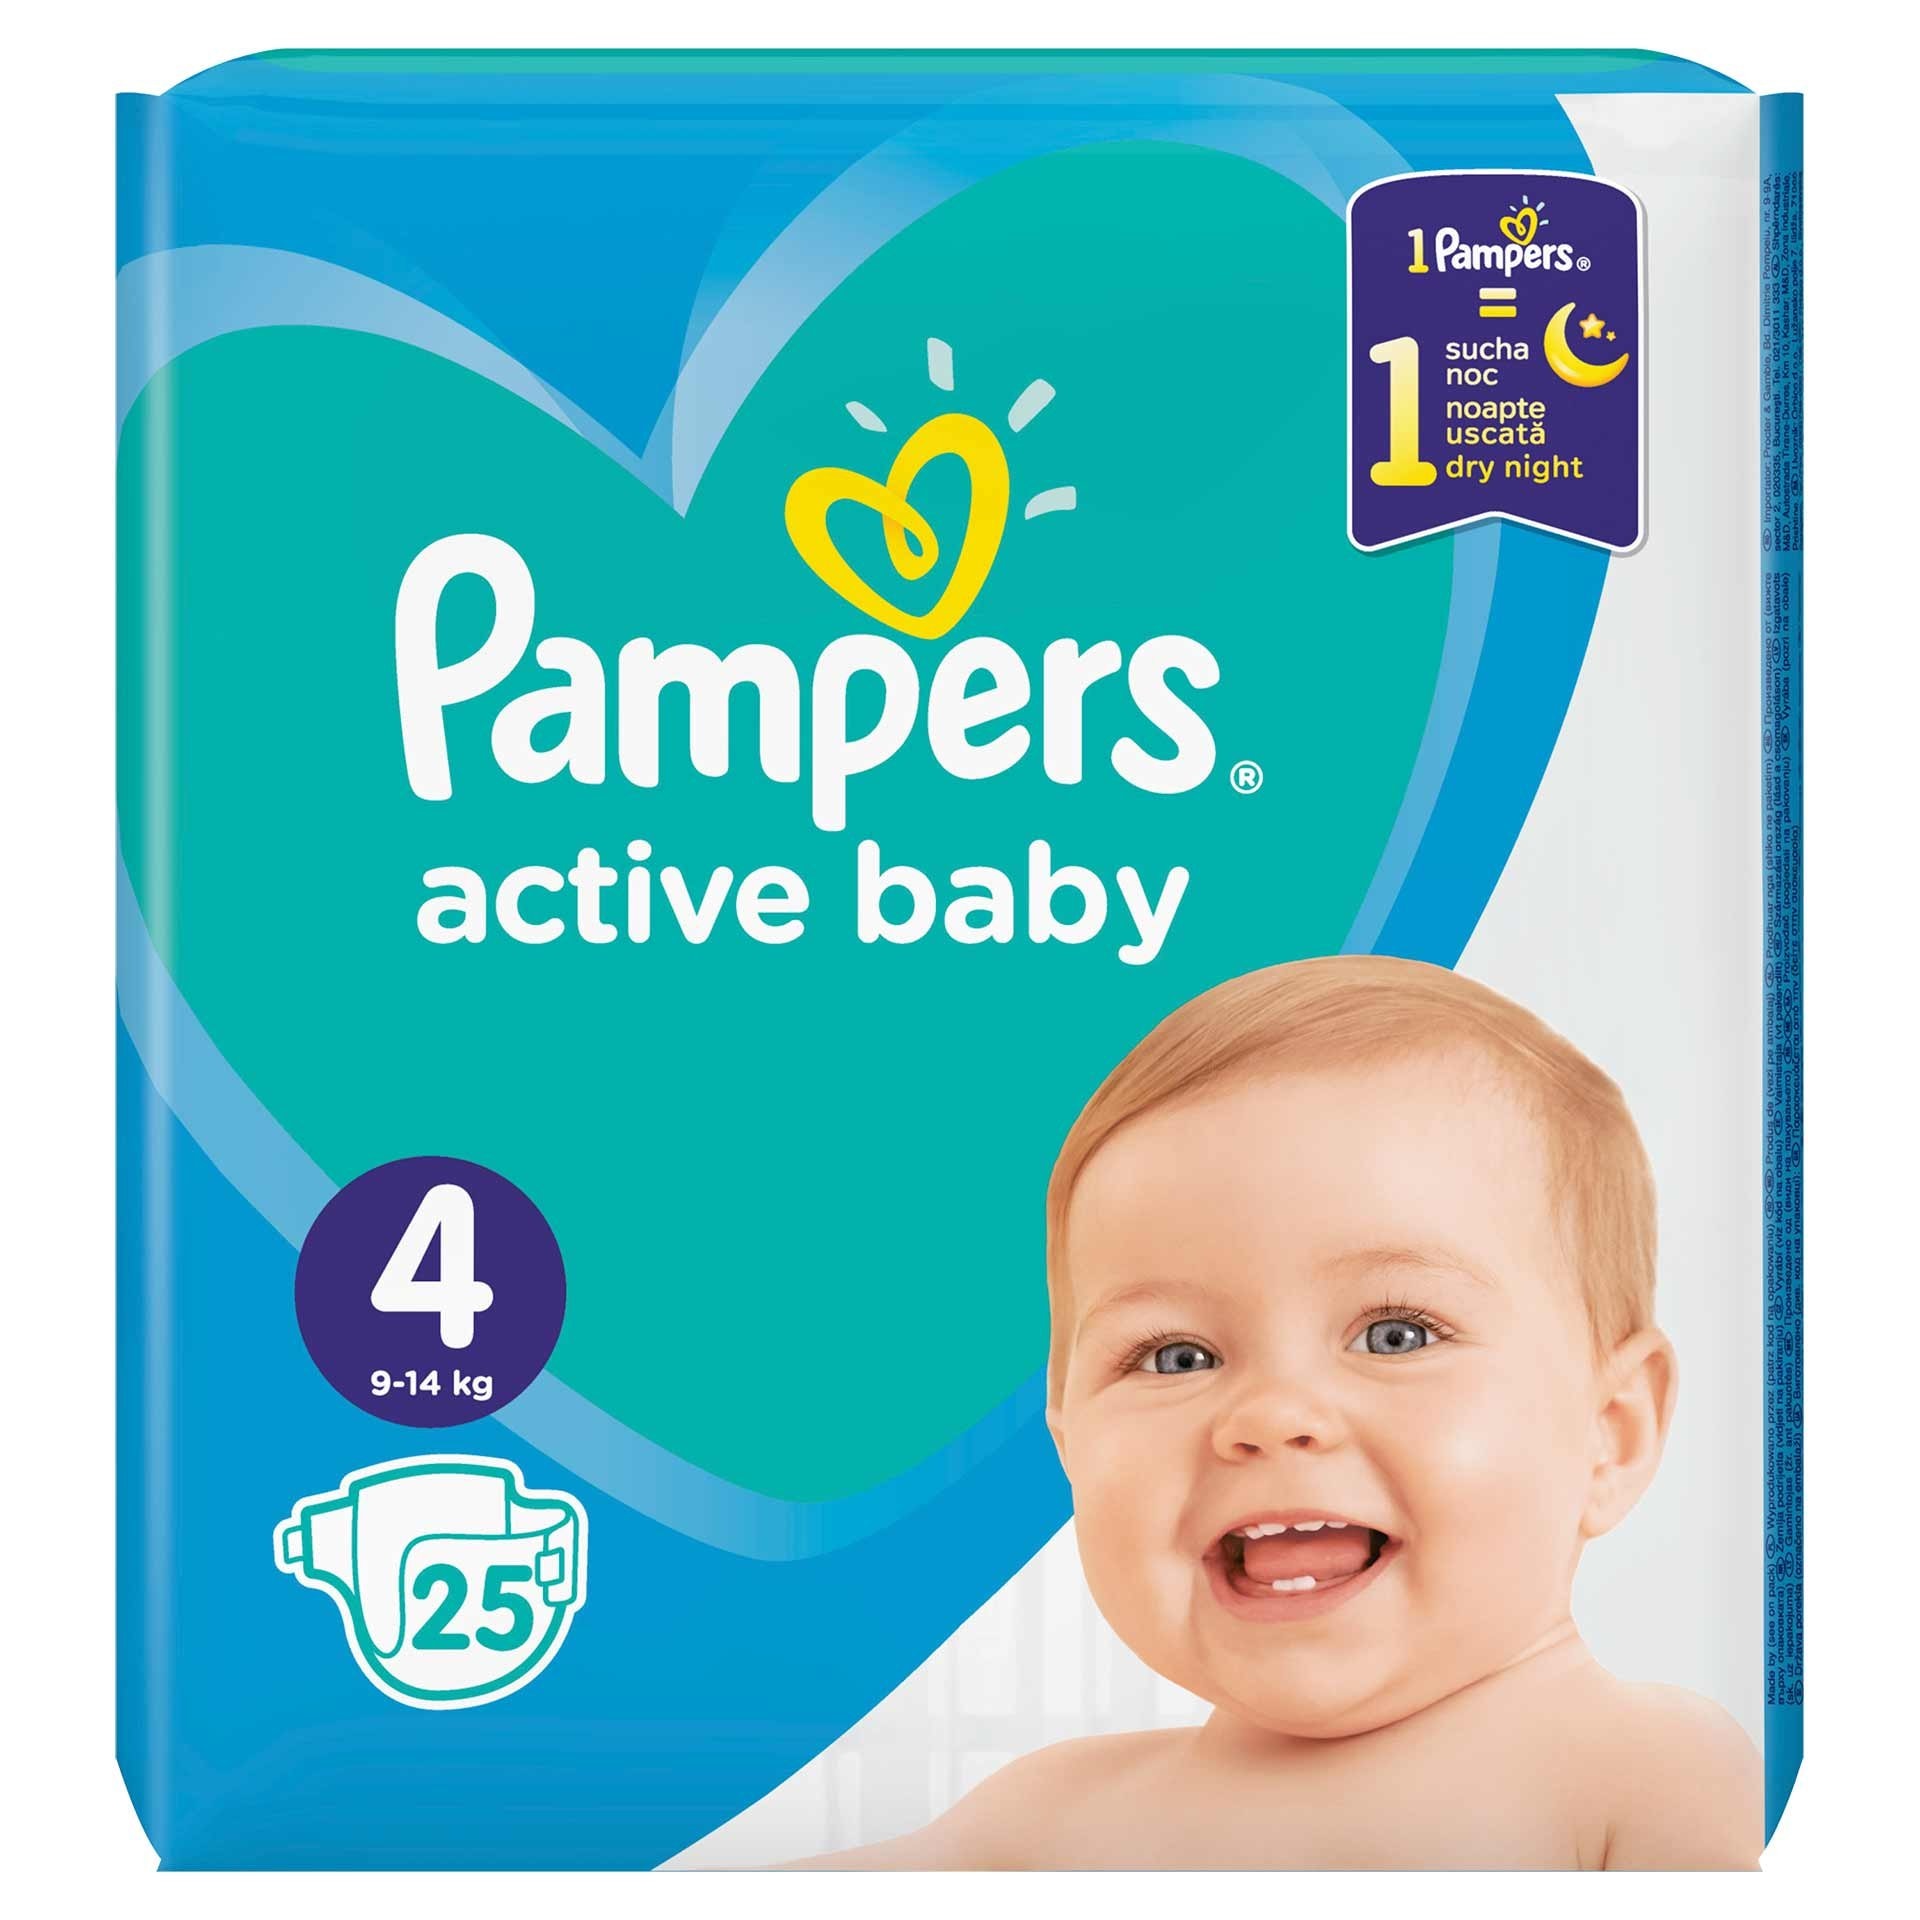 Tom Audreath Picasso Status Scutece Pampers Active Baby Compact Pack, Marimea 4, 9-14 kg, 25 buc - eMAG .ro